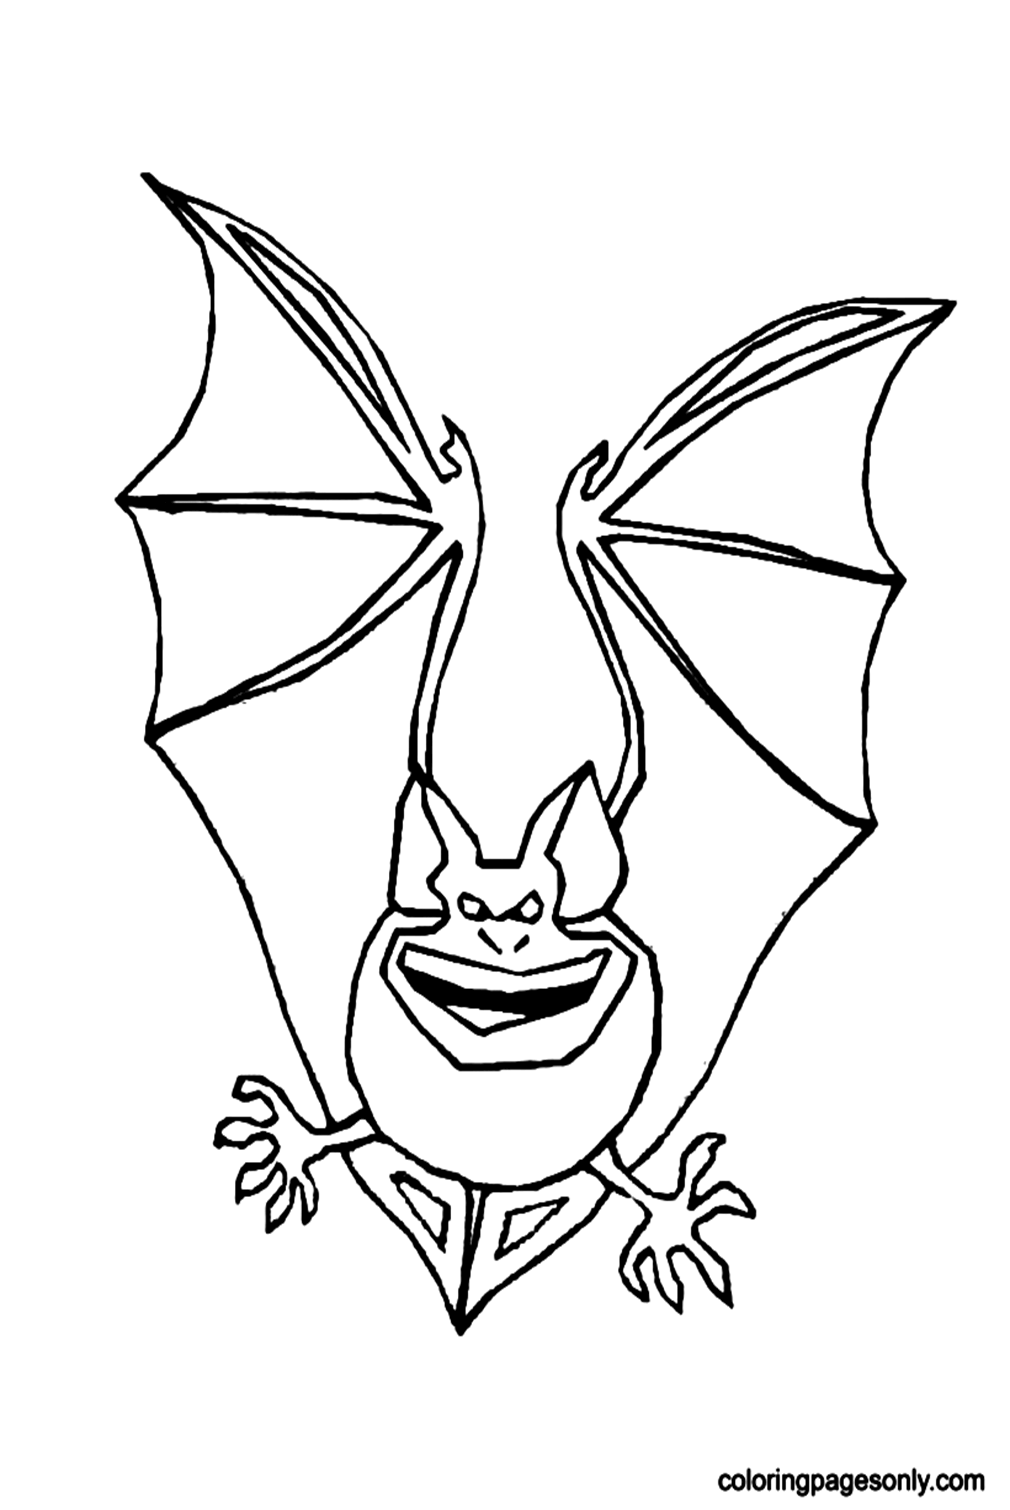 Scary Halloween Bat Free Coloring Pages